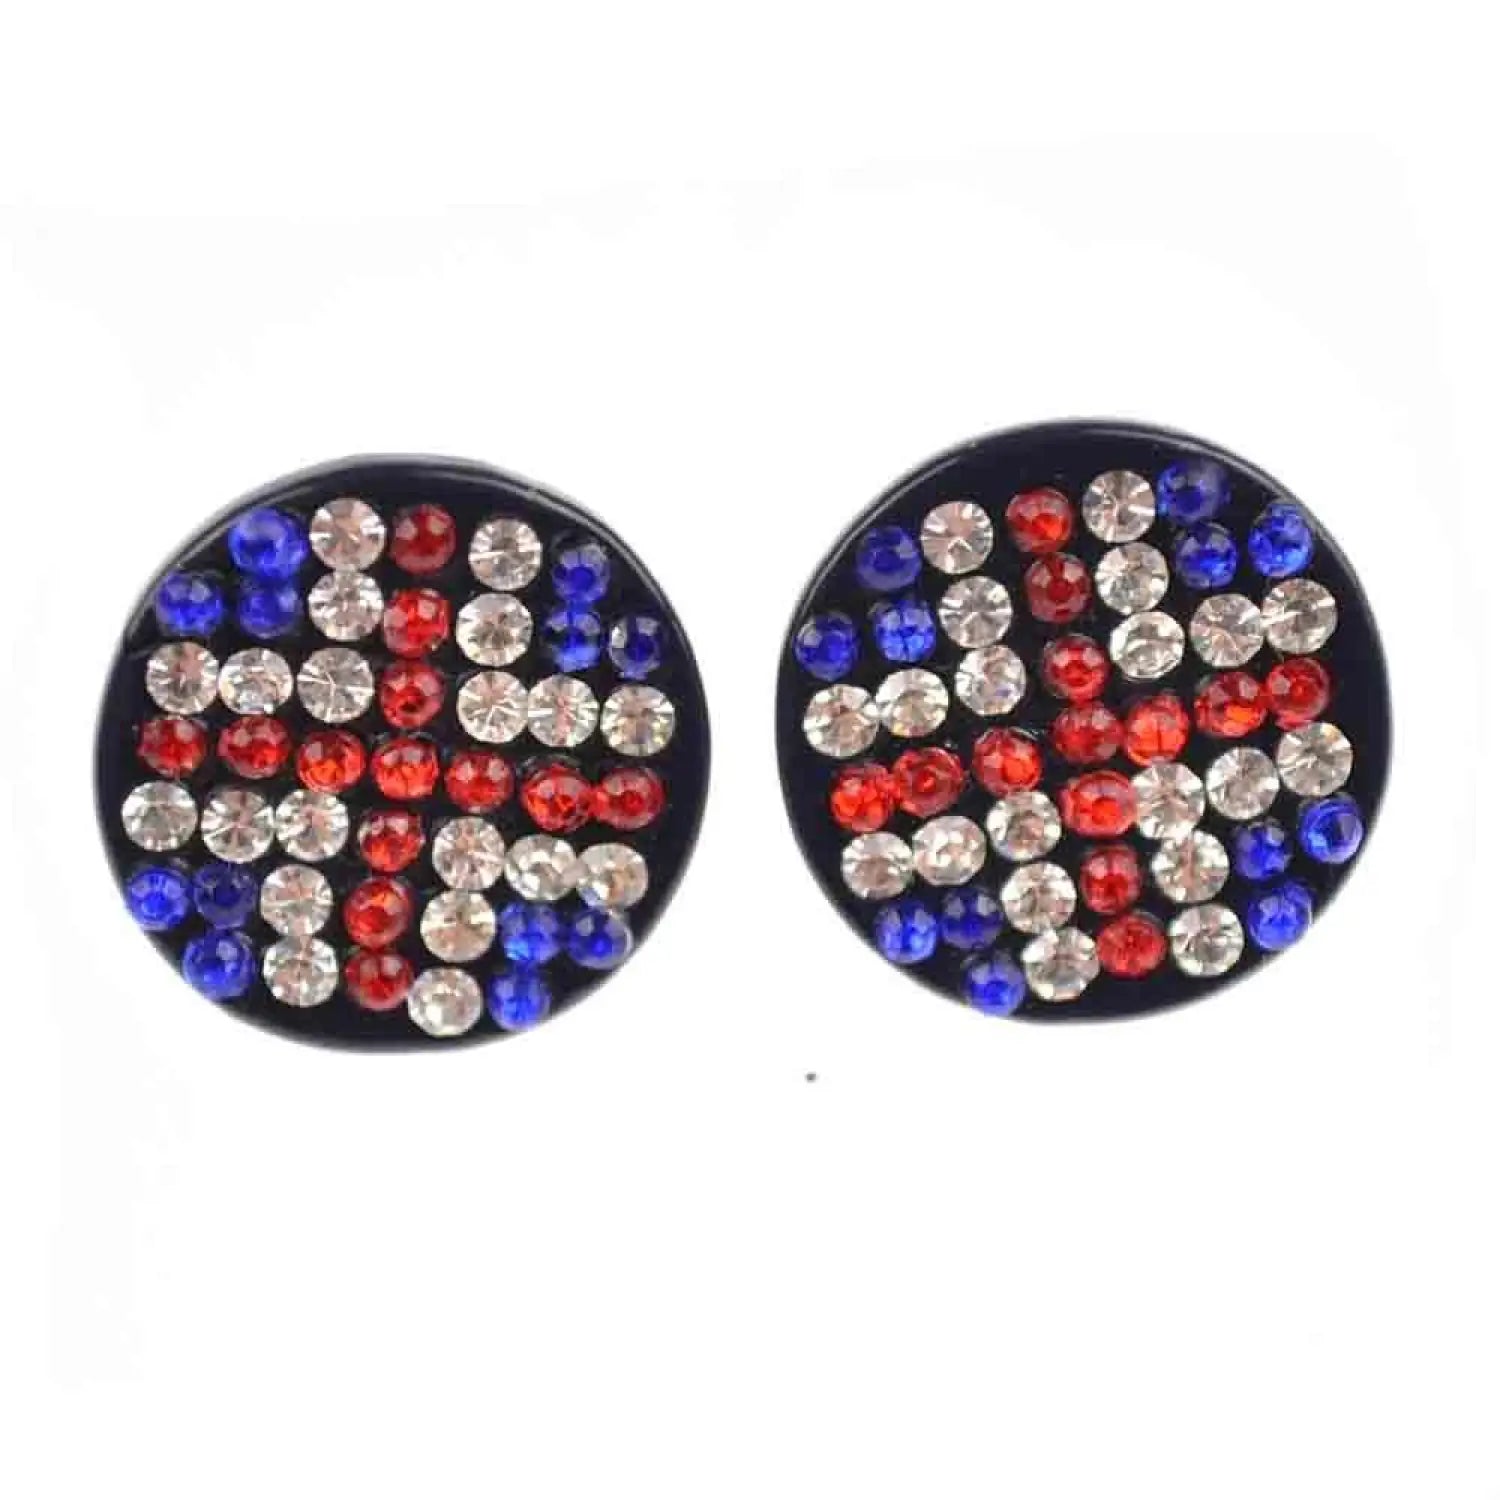 Union Jack Diamante Circle Stud Earrings with red, white and blue rhinestones